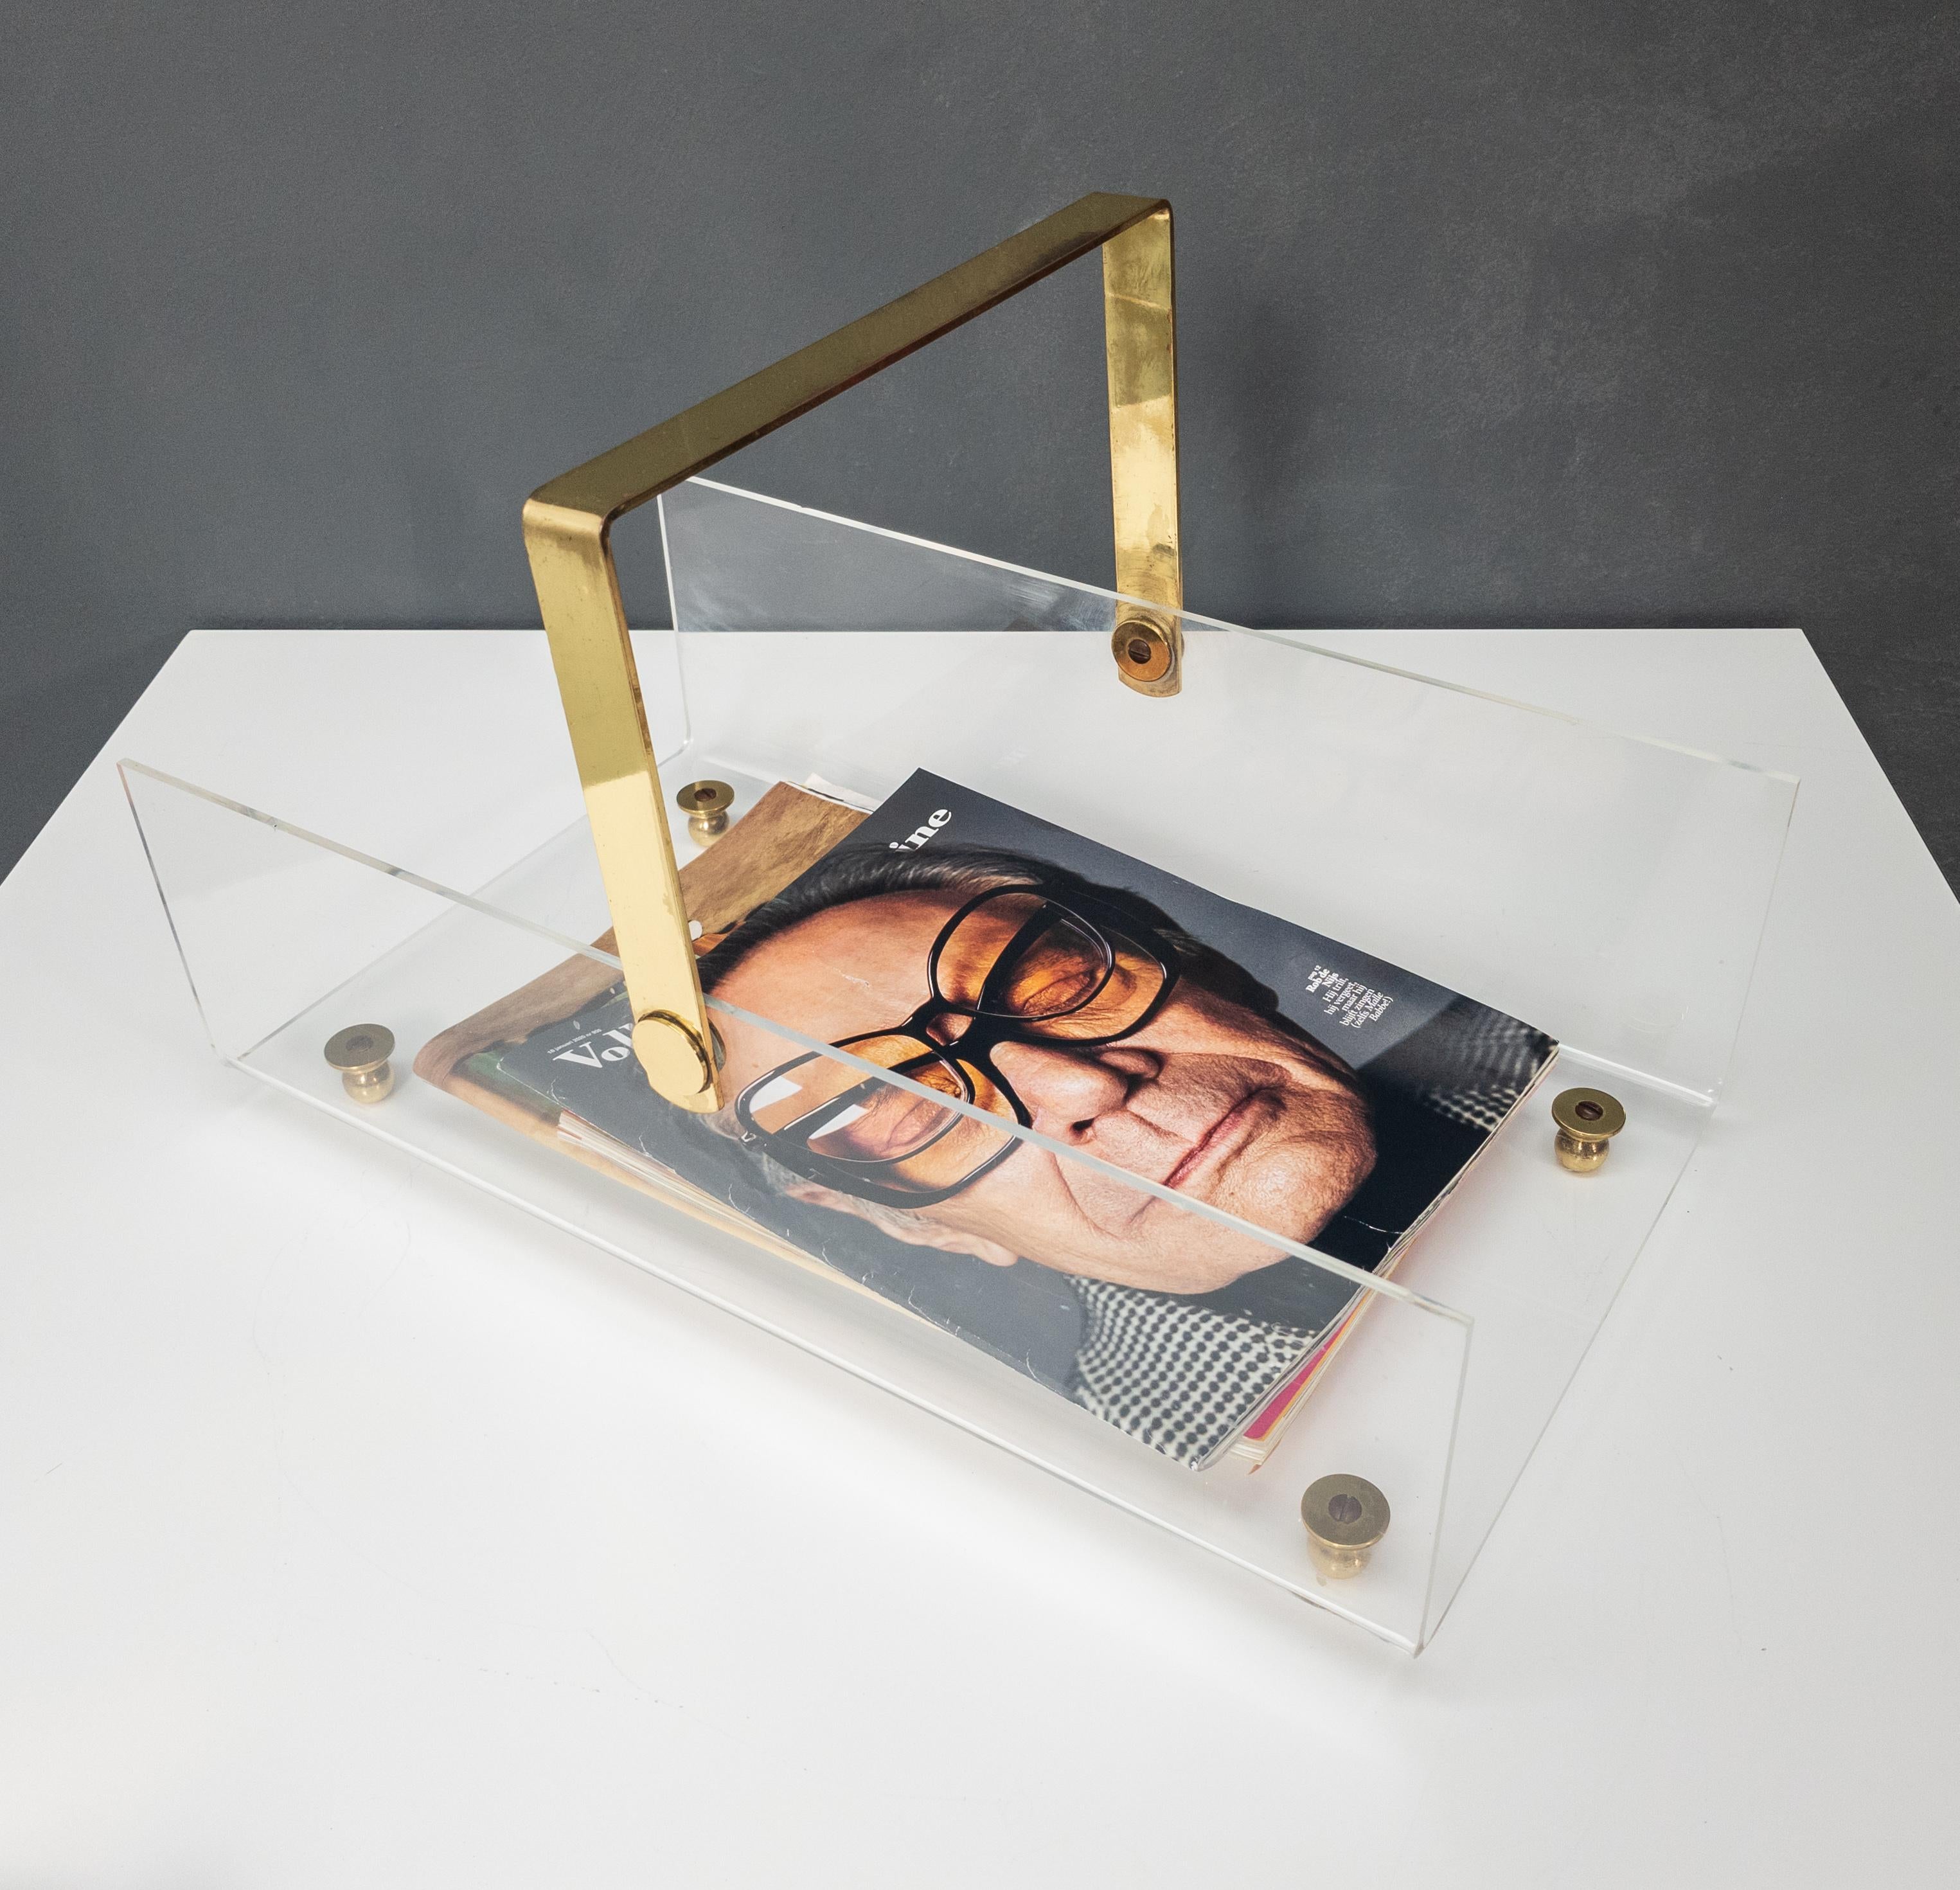 1970s, France

Mid-late 20th century French brass and plexiglass / Lucite magazine rack designed and produced by David Lange (Paul Lange), circa 1970s.

The rack is beautifully designed and proportioned and delivers that harmoniously opulent